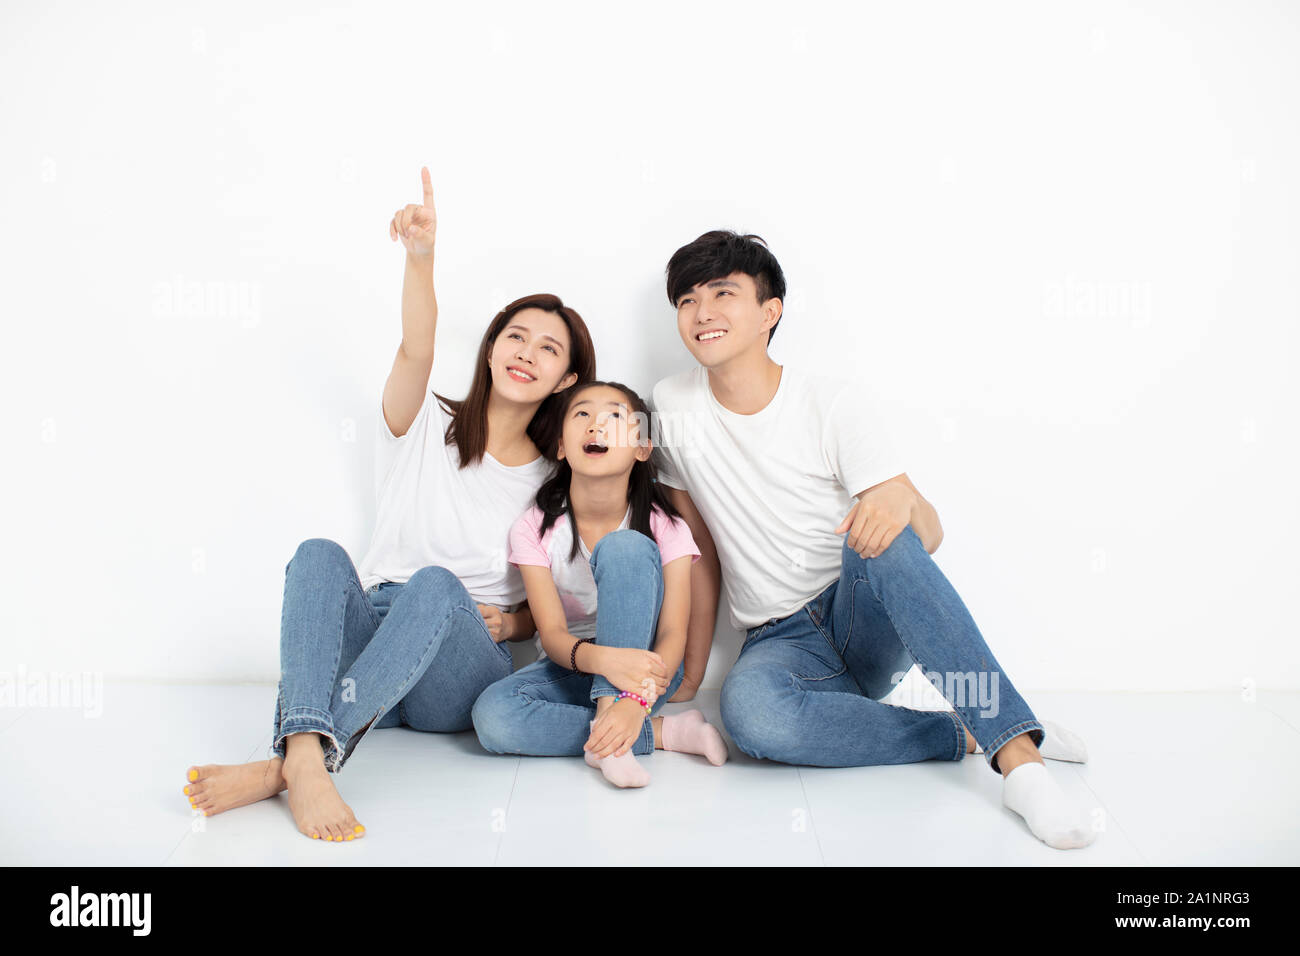 happy young family sitting on floor and looking up Stock Photo